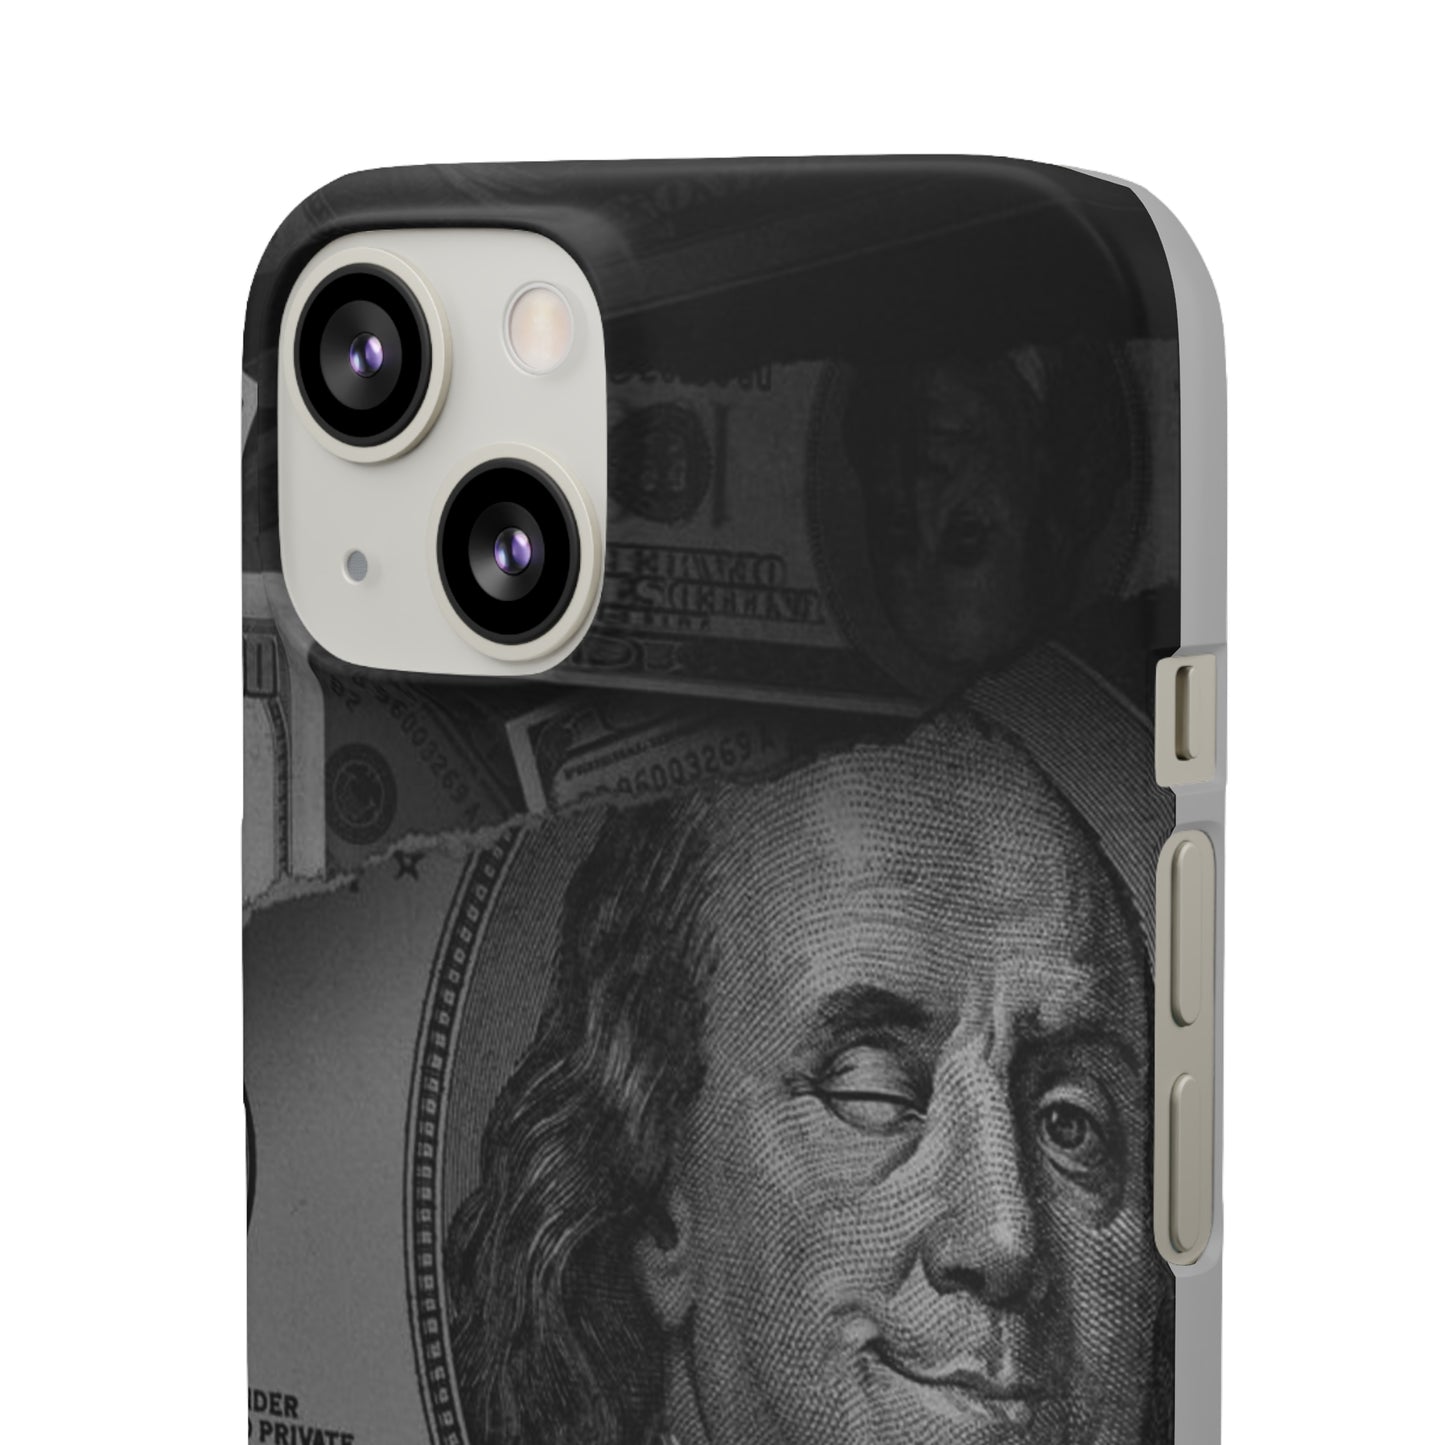 Snap Cases Authentic Dollar